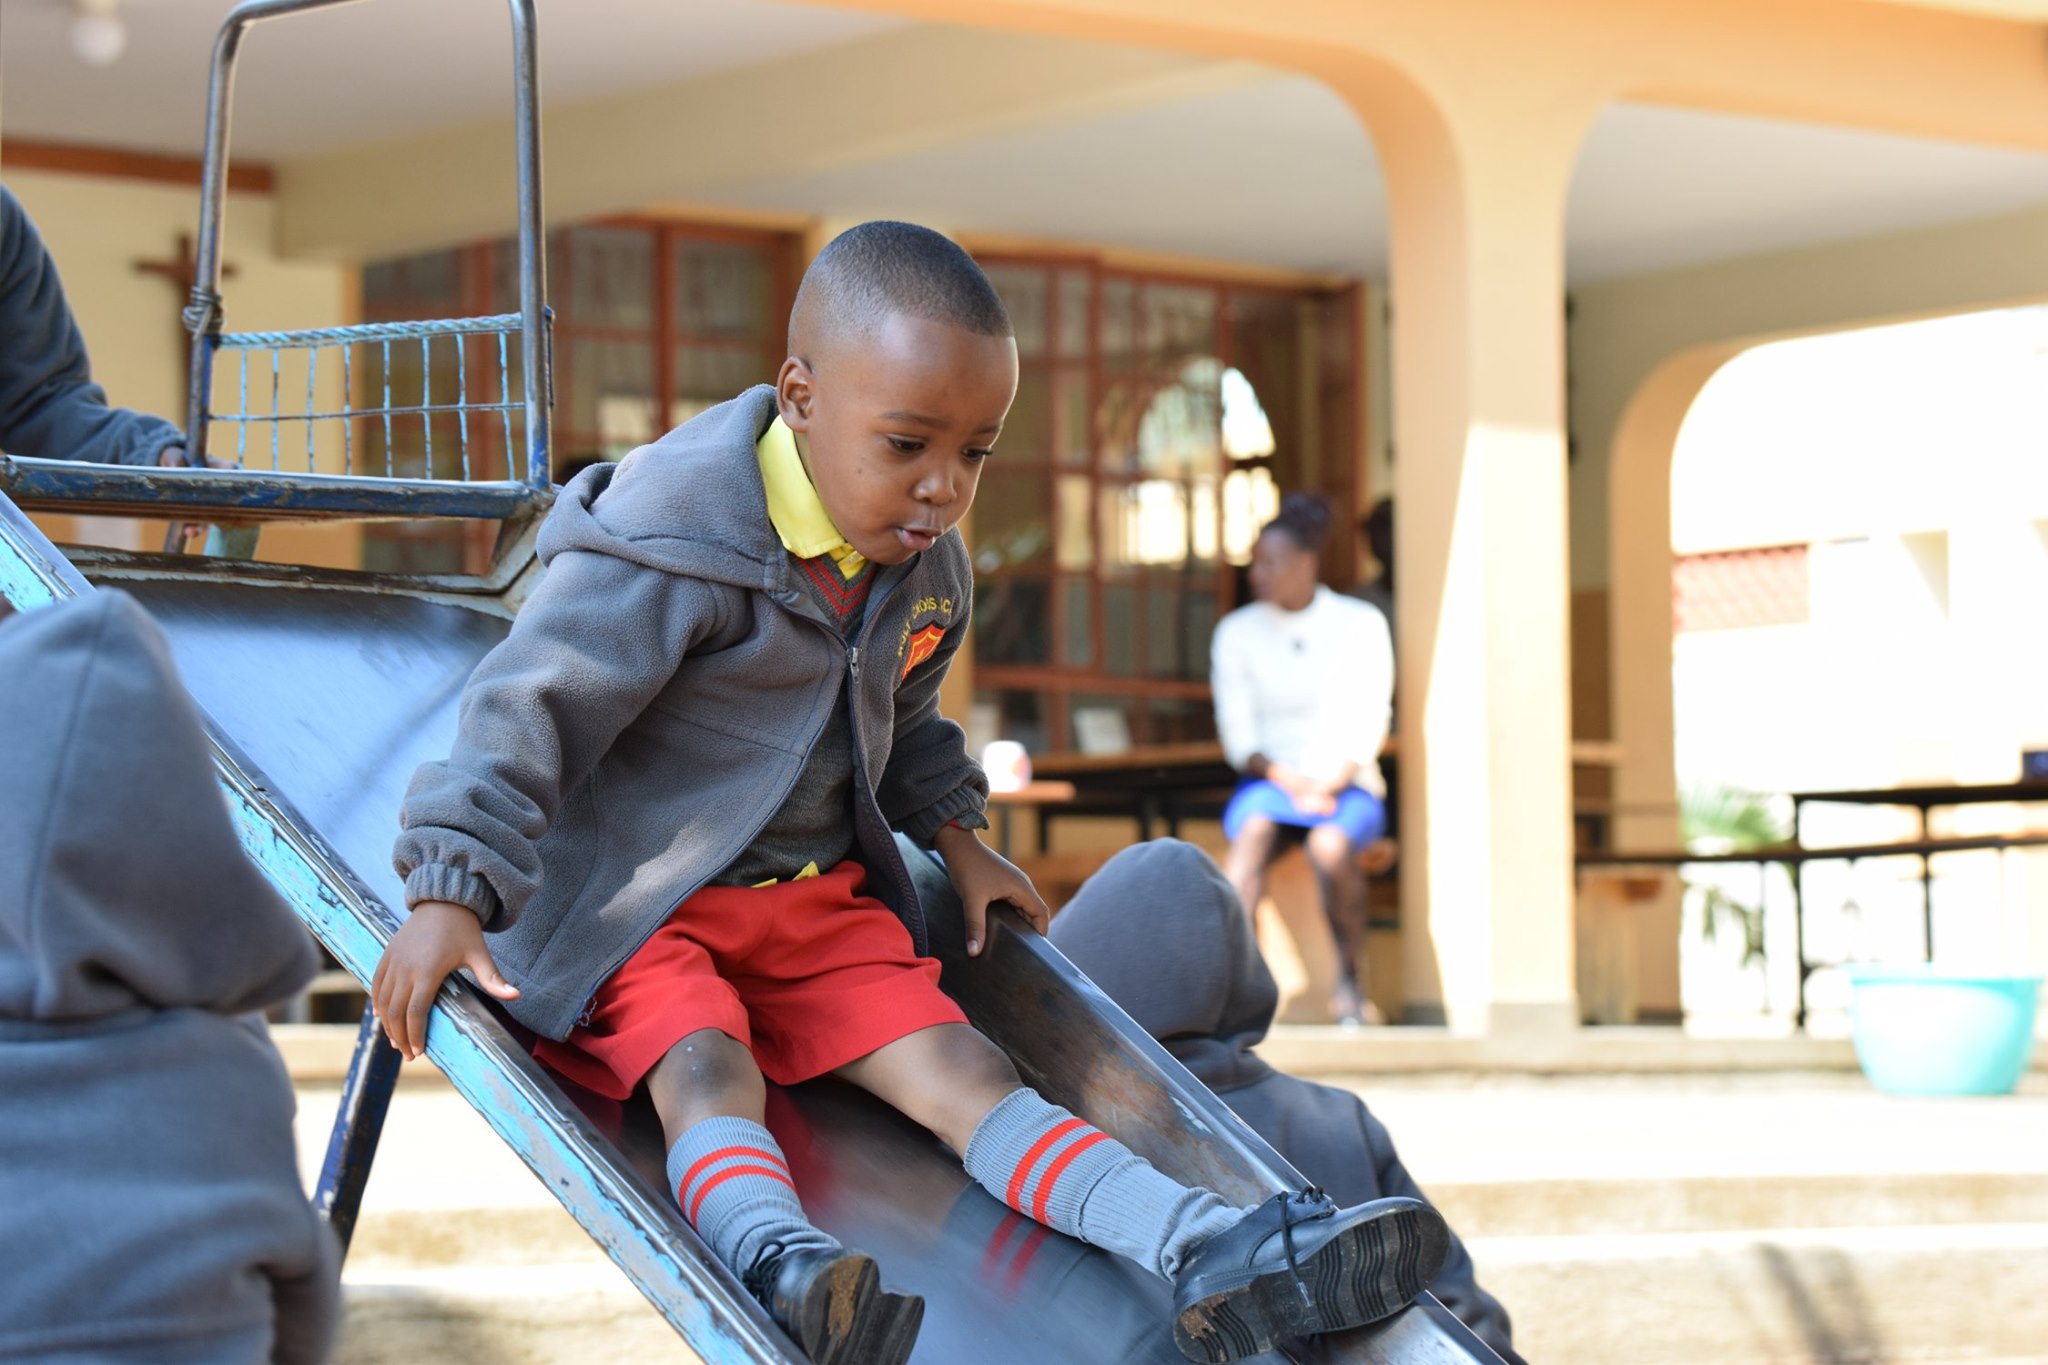 Students play in the playground at Holy Cross Academy in Lavington - Kenya